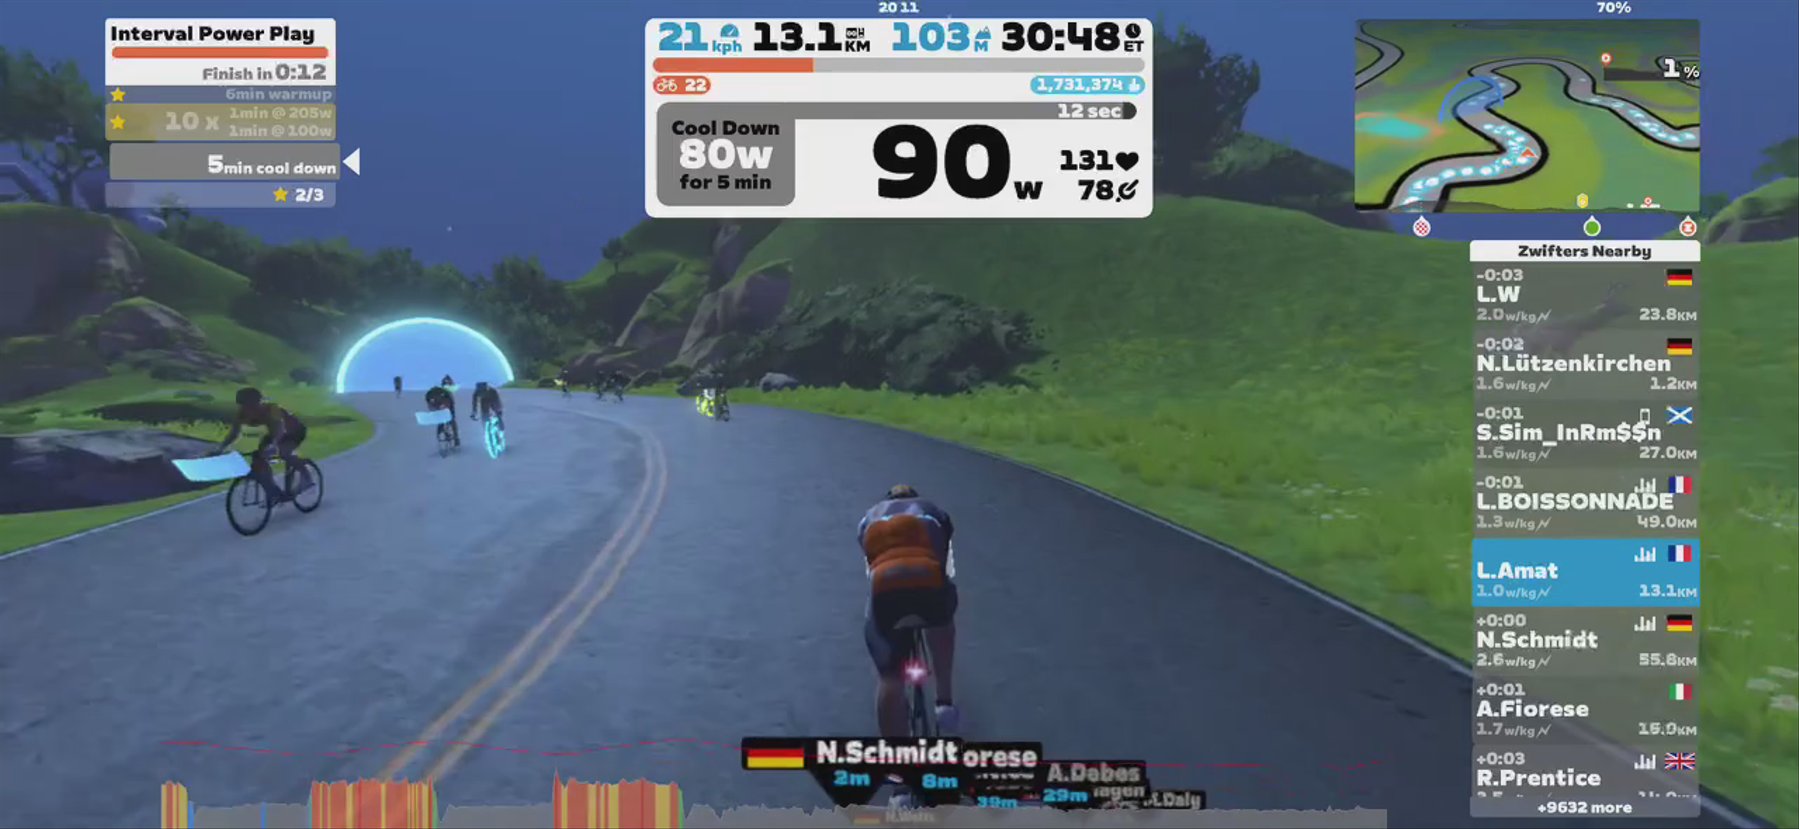 Zwift - Interval Power Play in Watopia